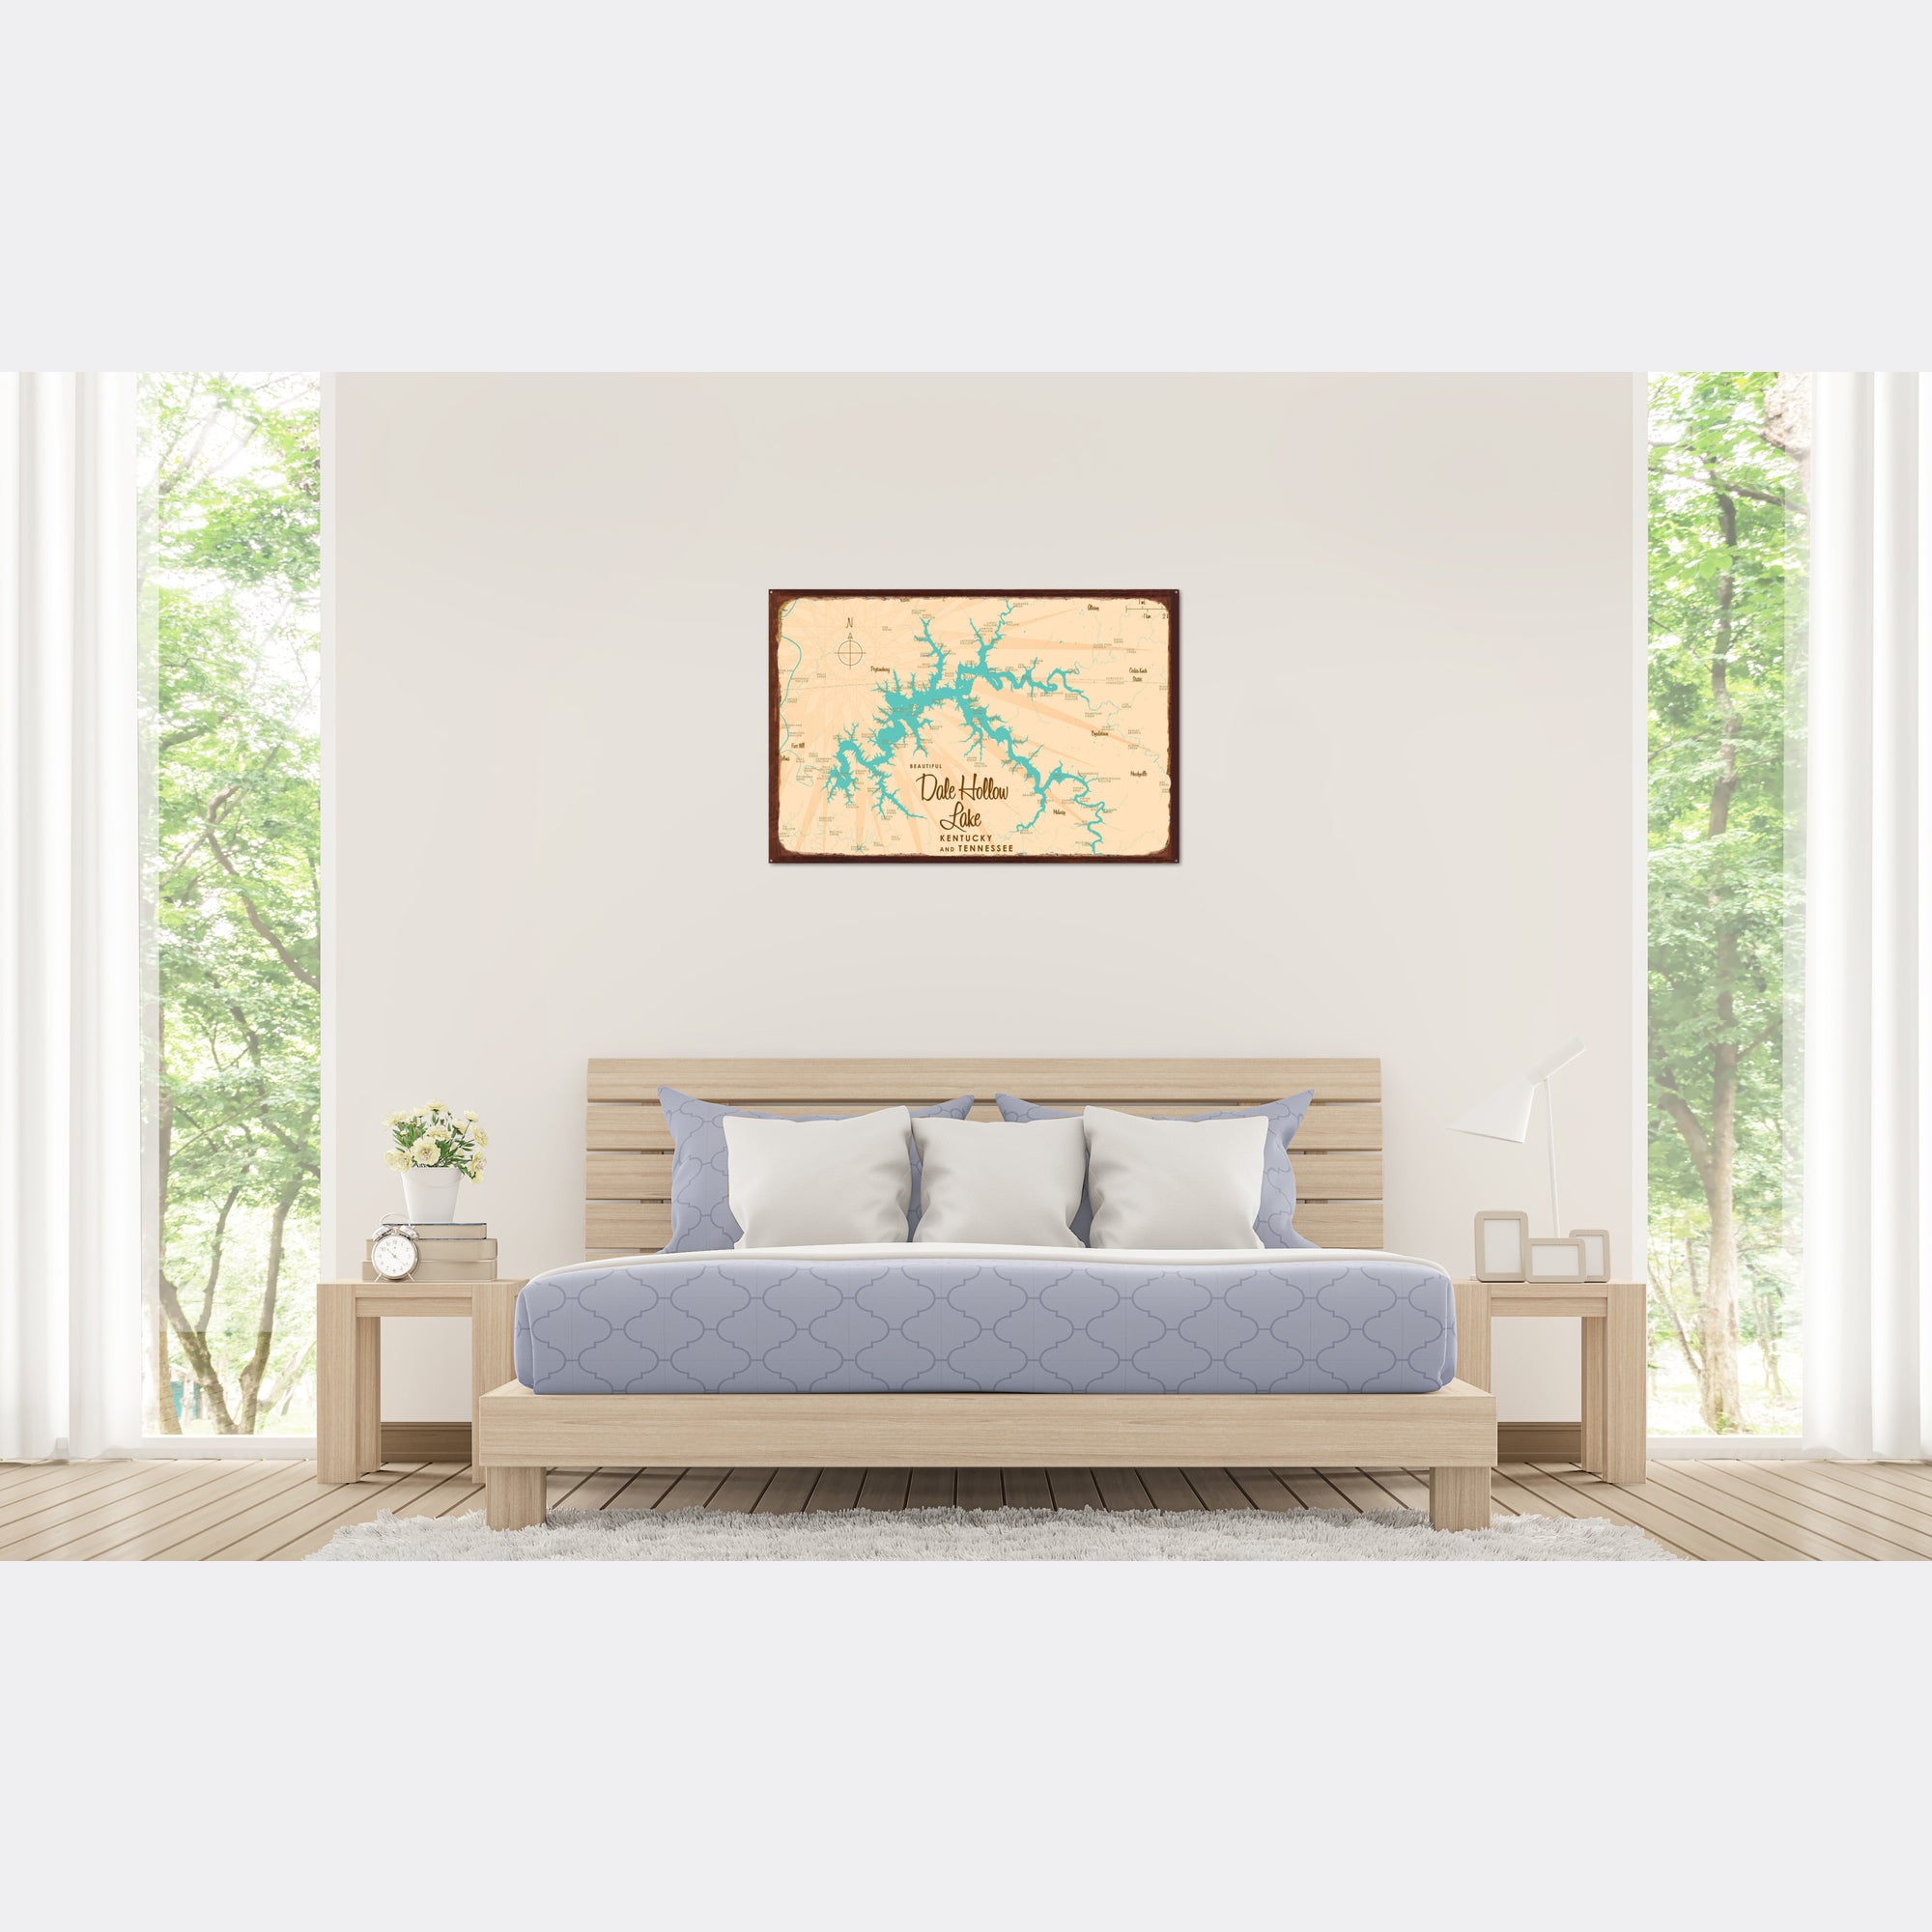 Dale Hollow Lake Kentucky Tennessee, Rustic Metal Sign Map Art